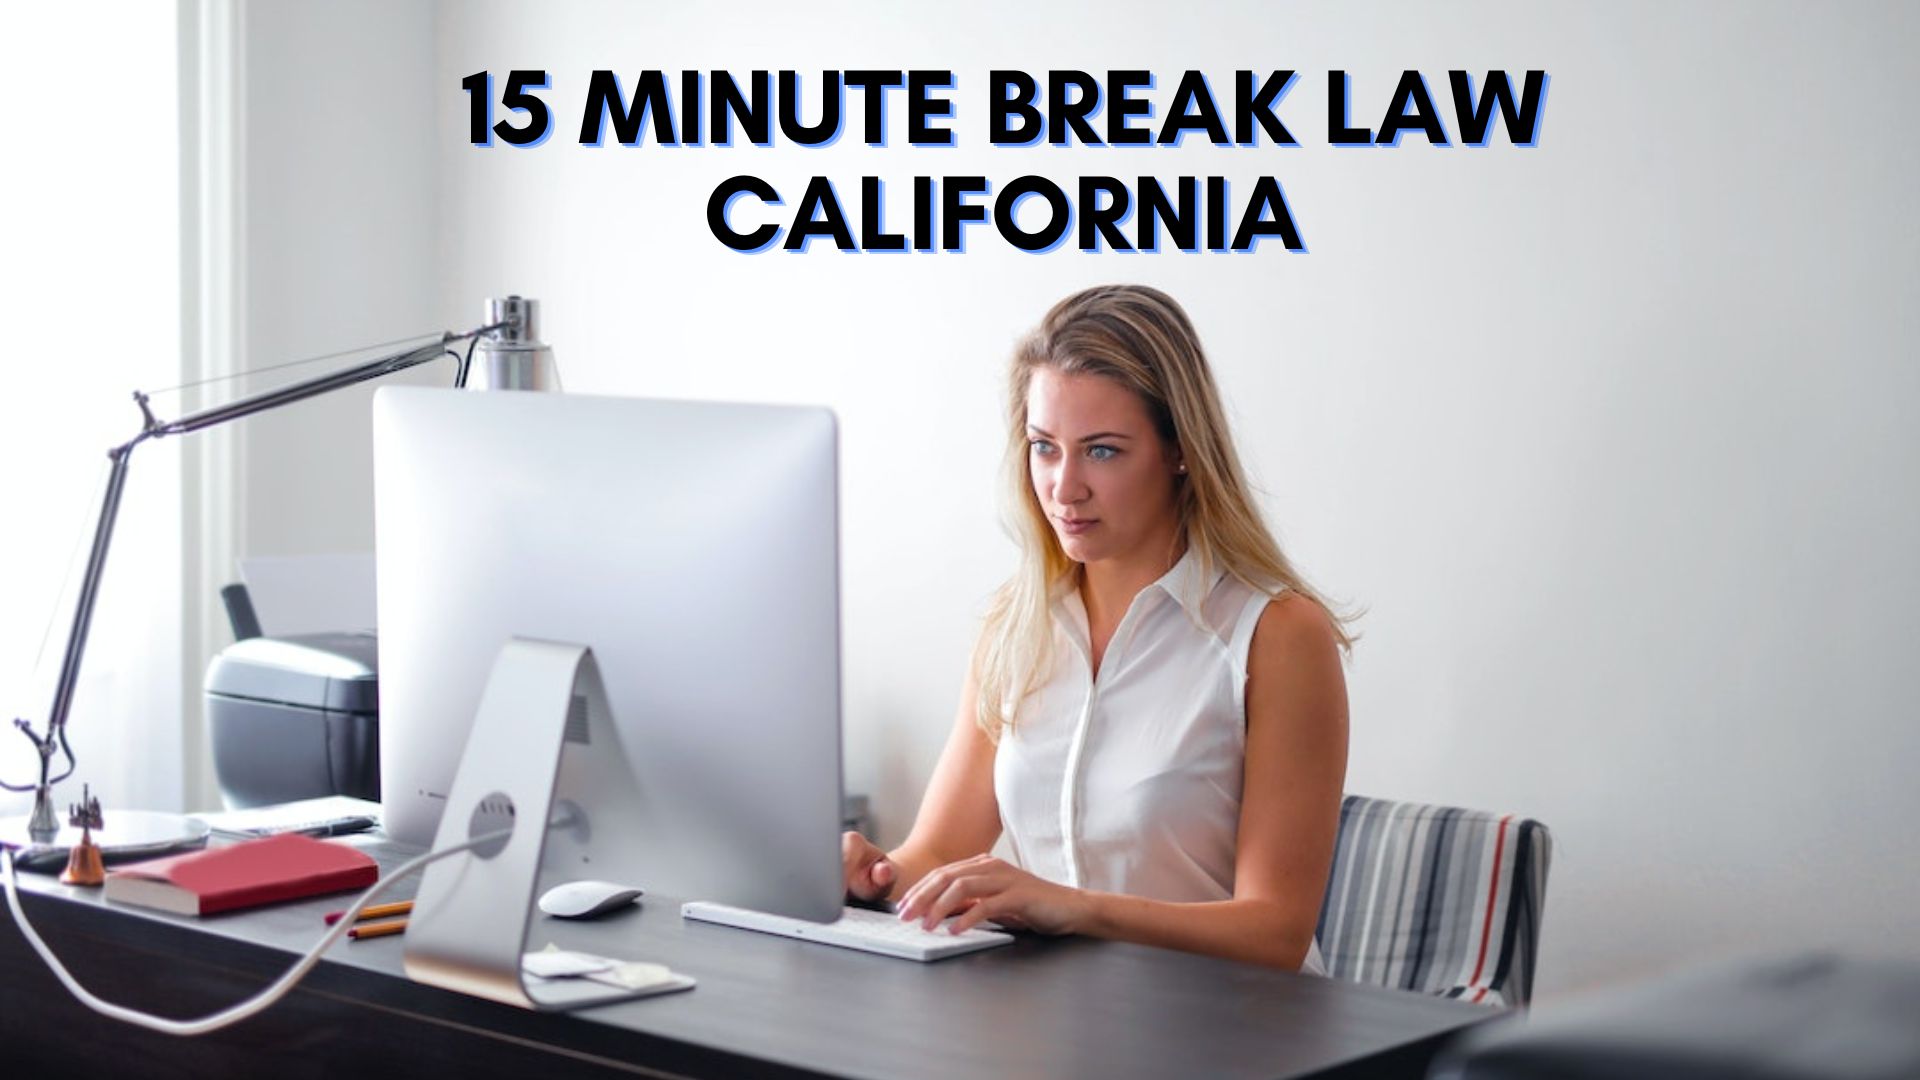 15 Minute Break Law California - Effects Of Allowing Workers To Take Advantage Of It